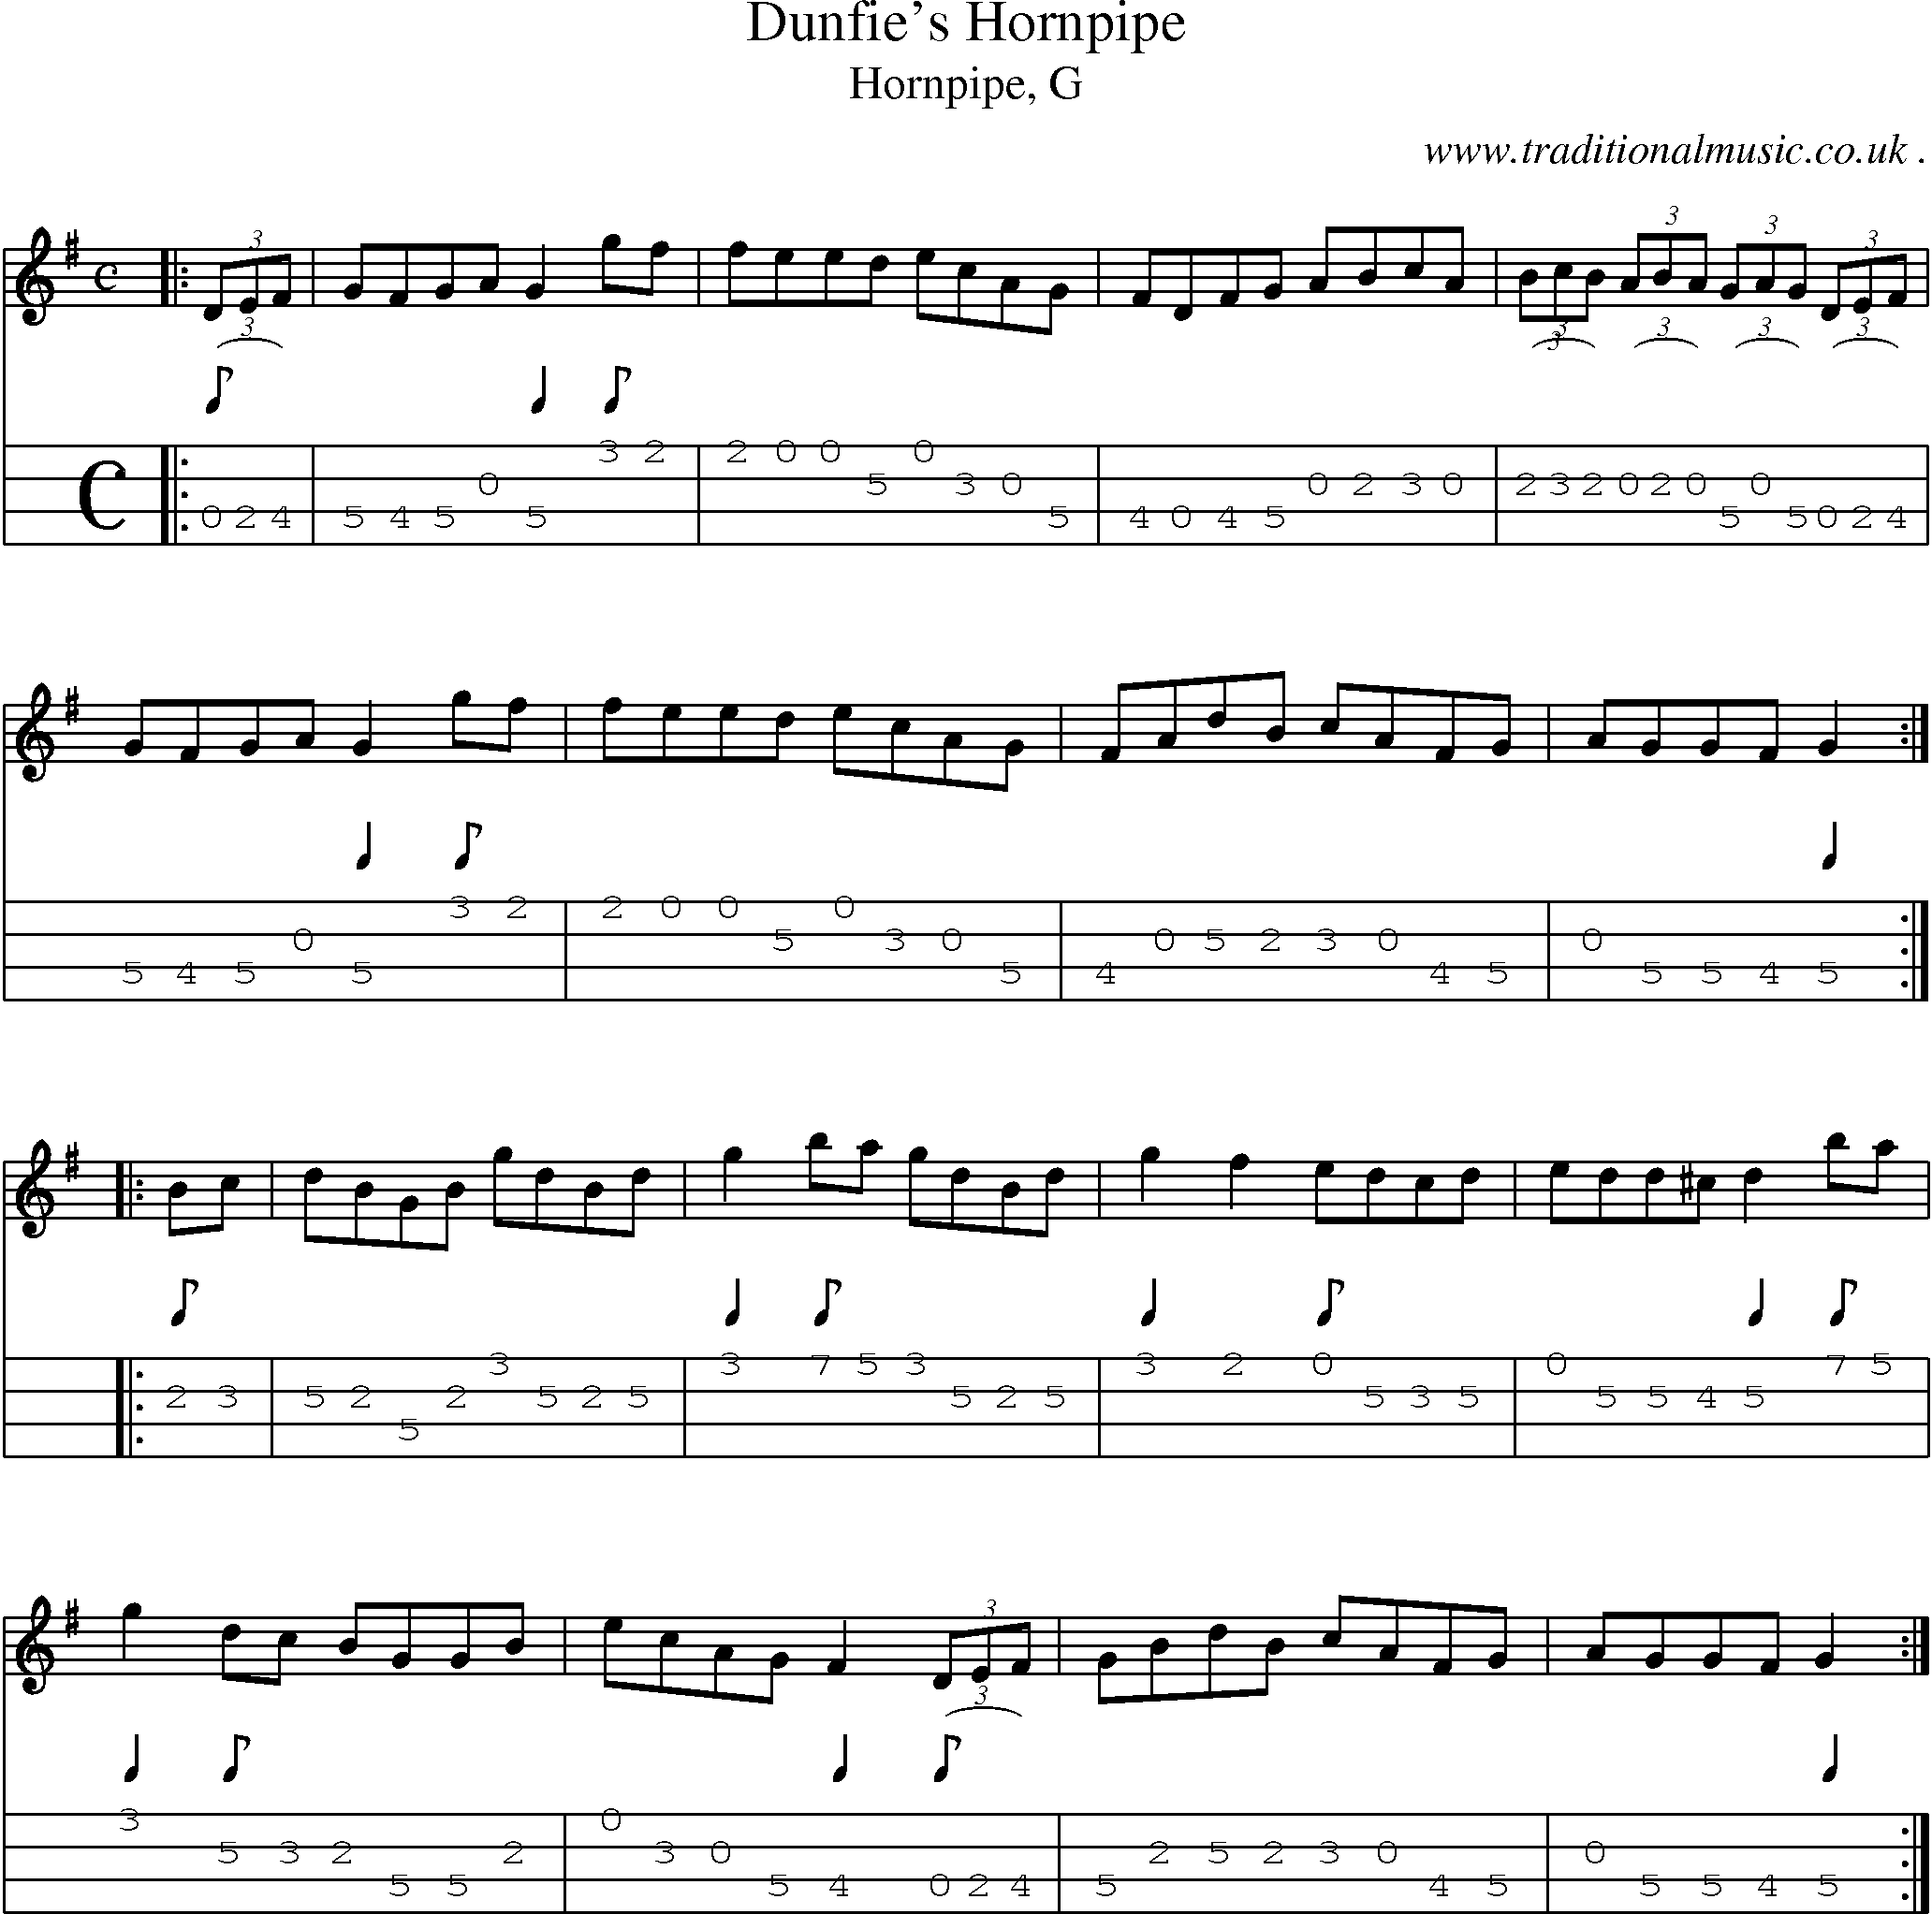 Sheet-music  score, Chords and Mandolin Tabs for Dunfies Hornpipe